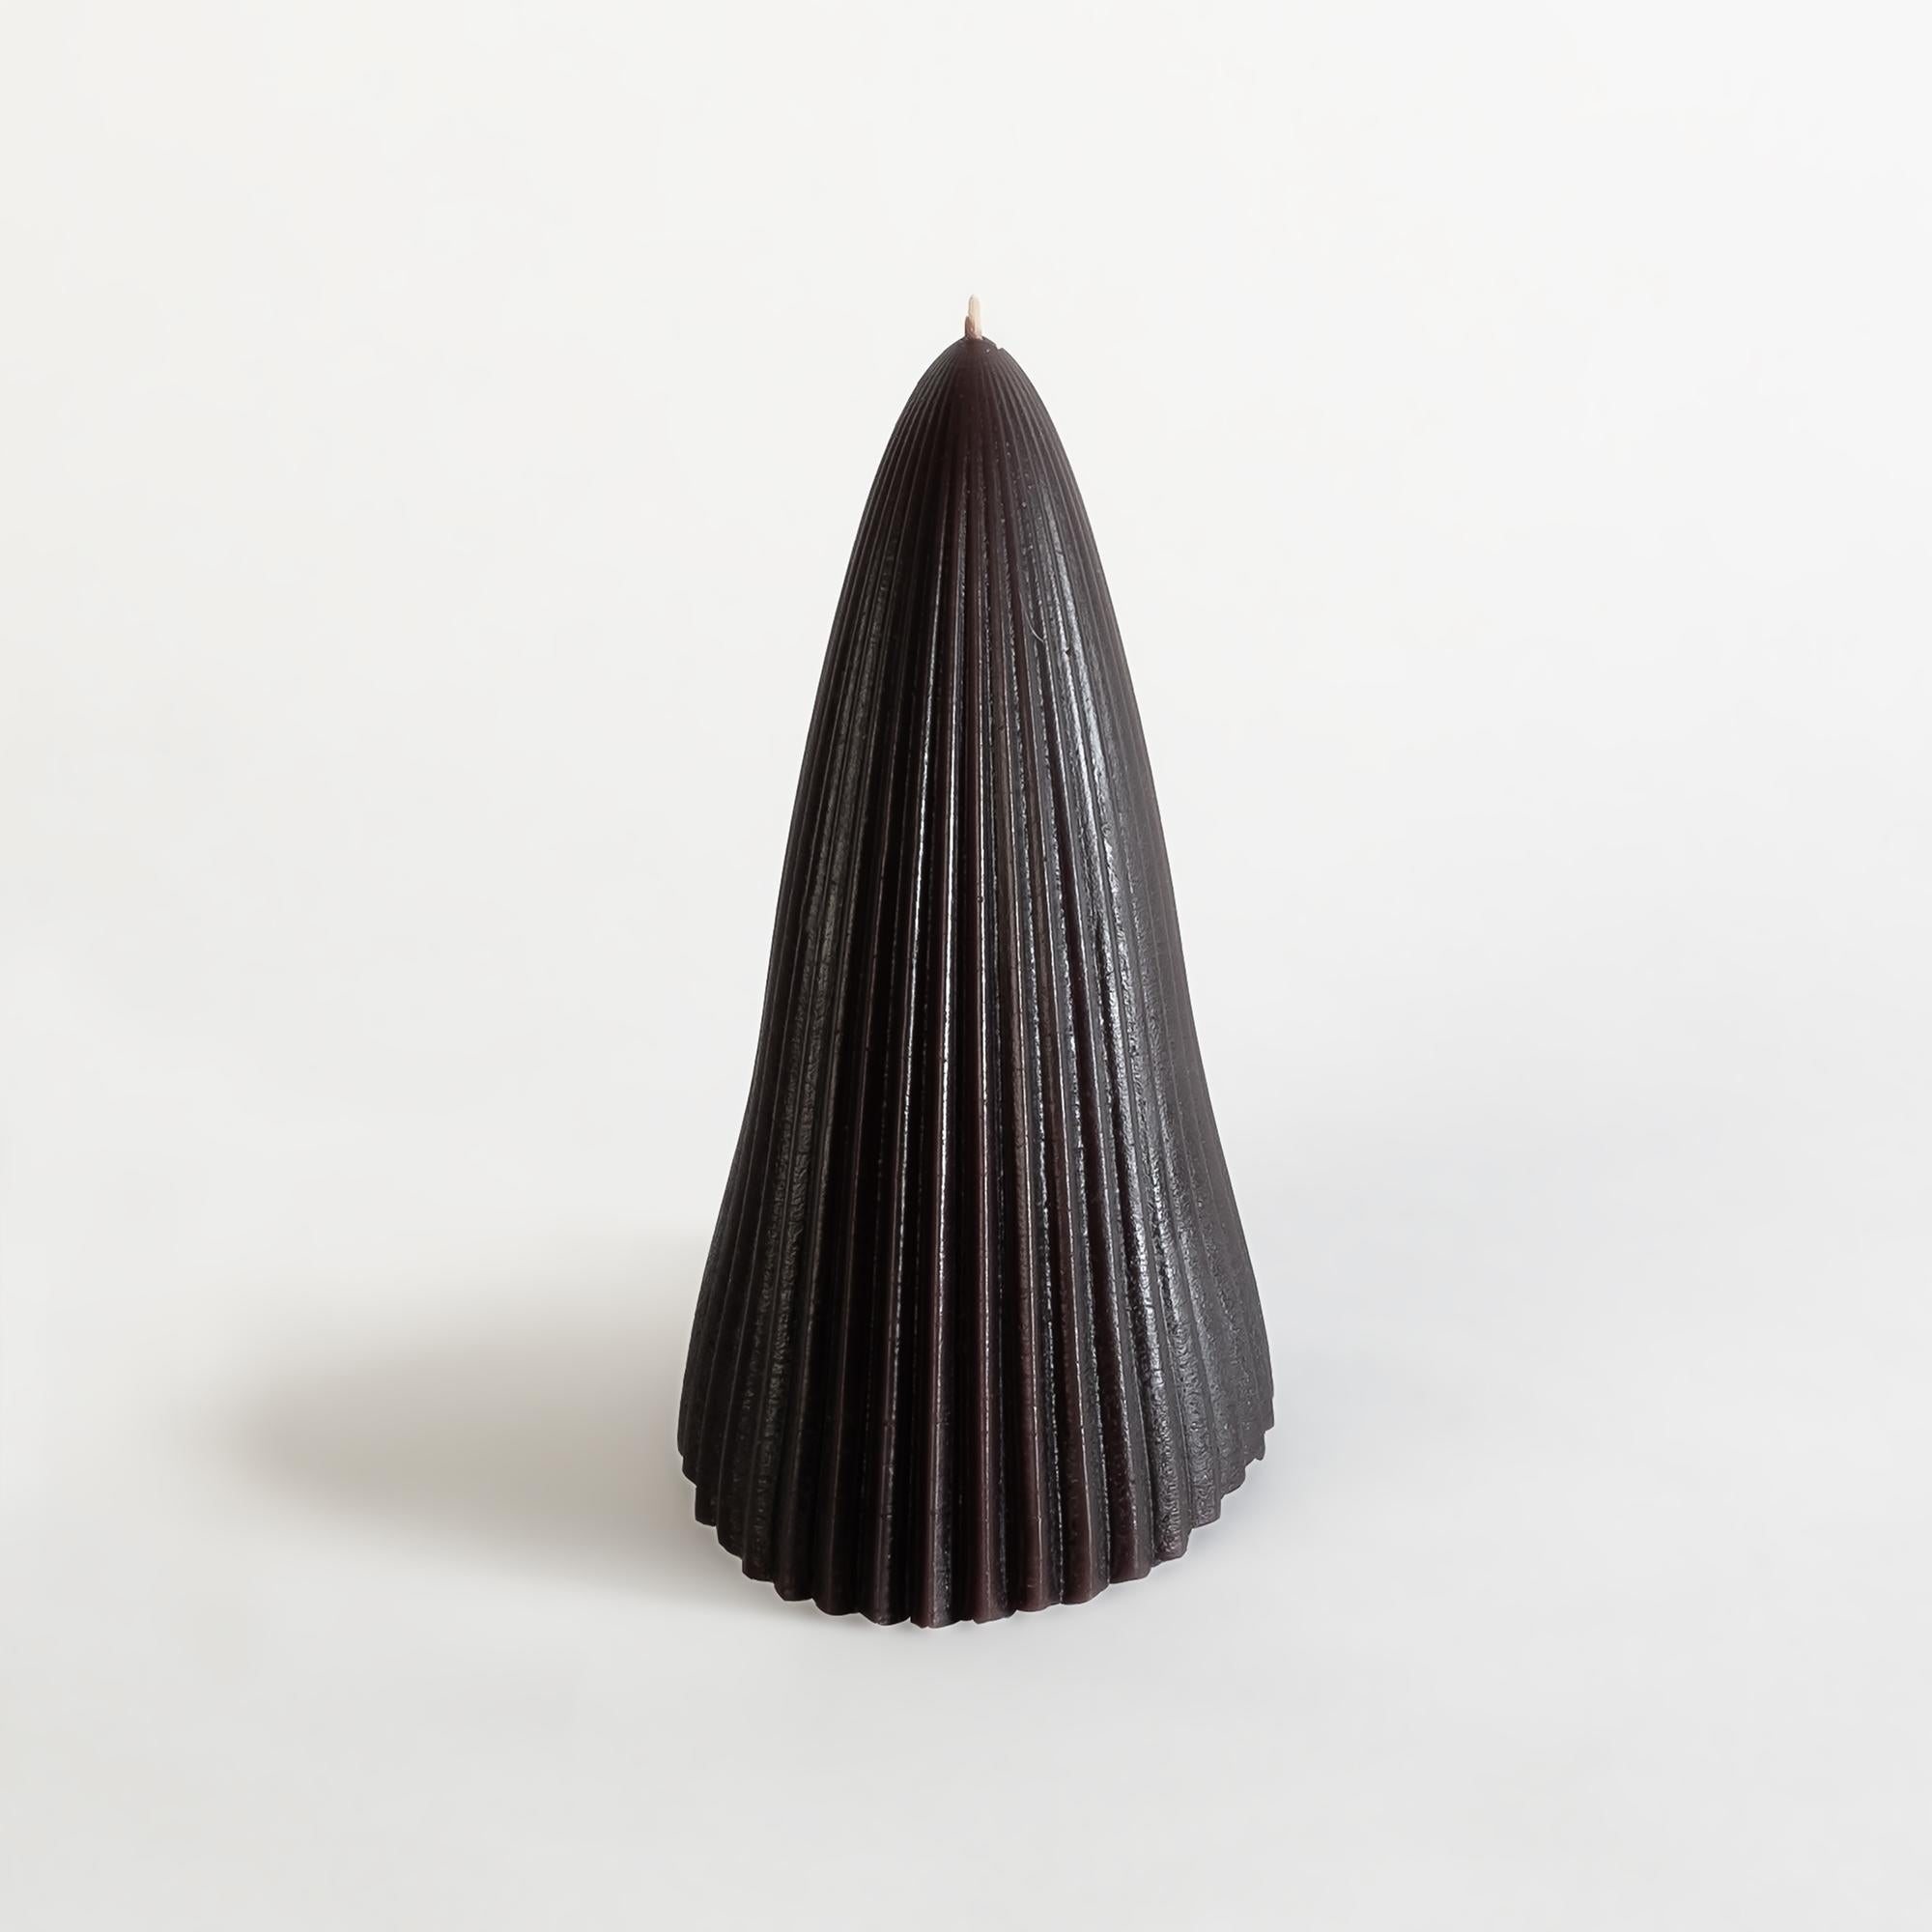 Tusk Candle, Small, Black Beeswax In New Condition For Sale In Oakland, CA